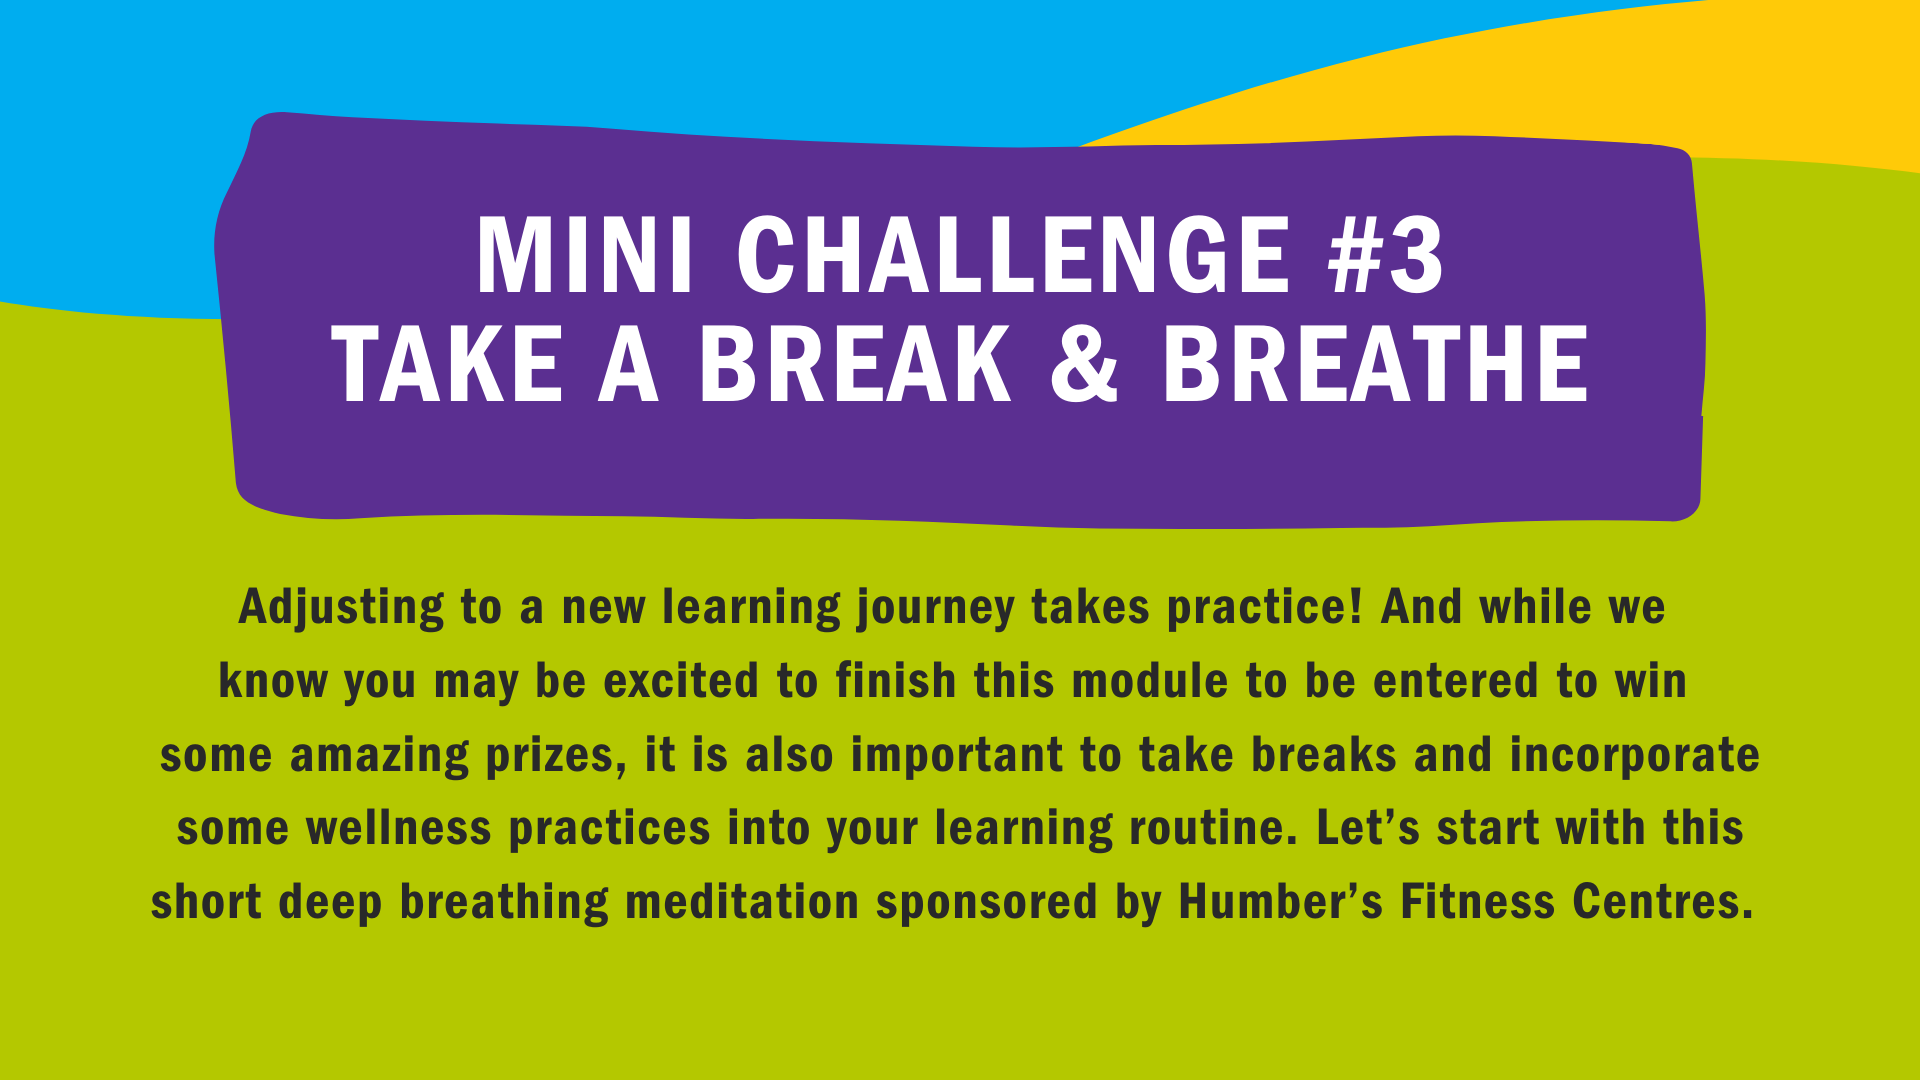 Mini Challenge #3: Take A Break & Breathe. Adjusting to a new learning journey takes practice! And while we know you may be excited to finish this module to be entered to win some amazing prizes, it is also important to take breaks and incorporate some wellness practices into your learning routine. Let's start with a short deep breathing meditation sponsored by Humber's Fitness Centres.